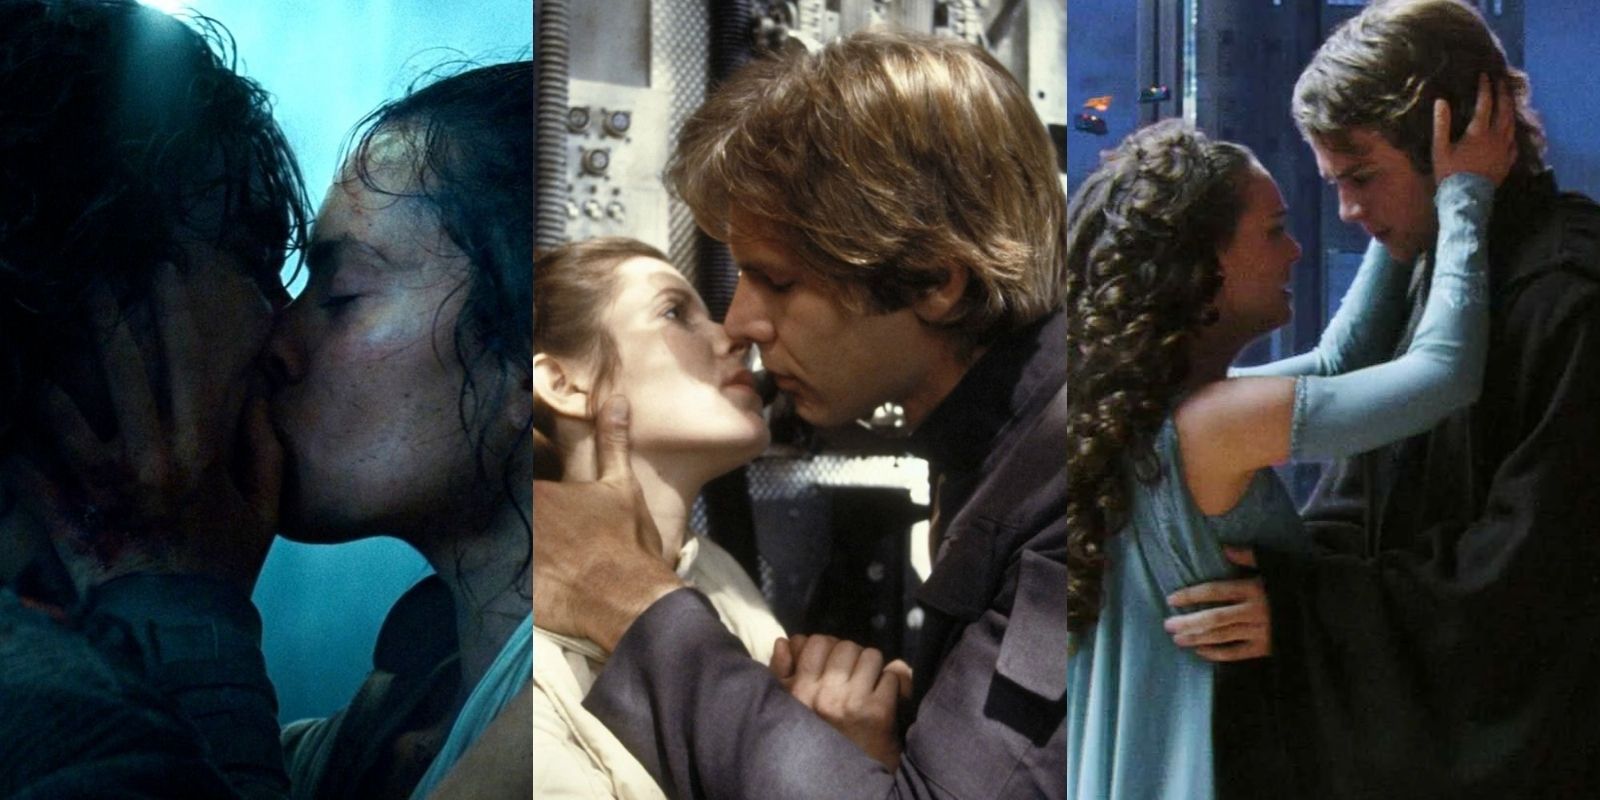 Rey and Kylo Ren kiss, Han Solo and Leia Organa about to kiss, and Padme Amidala holds Anakin Skywalker's face in Star Wars